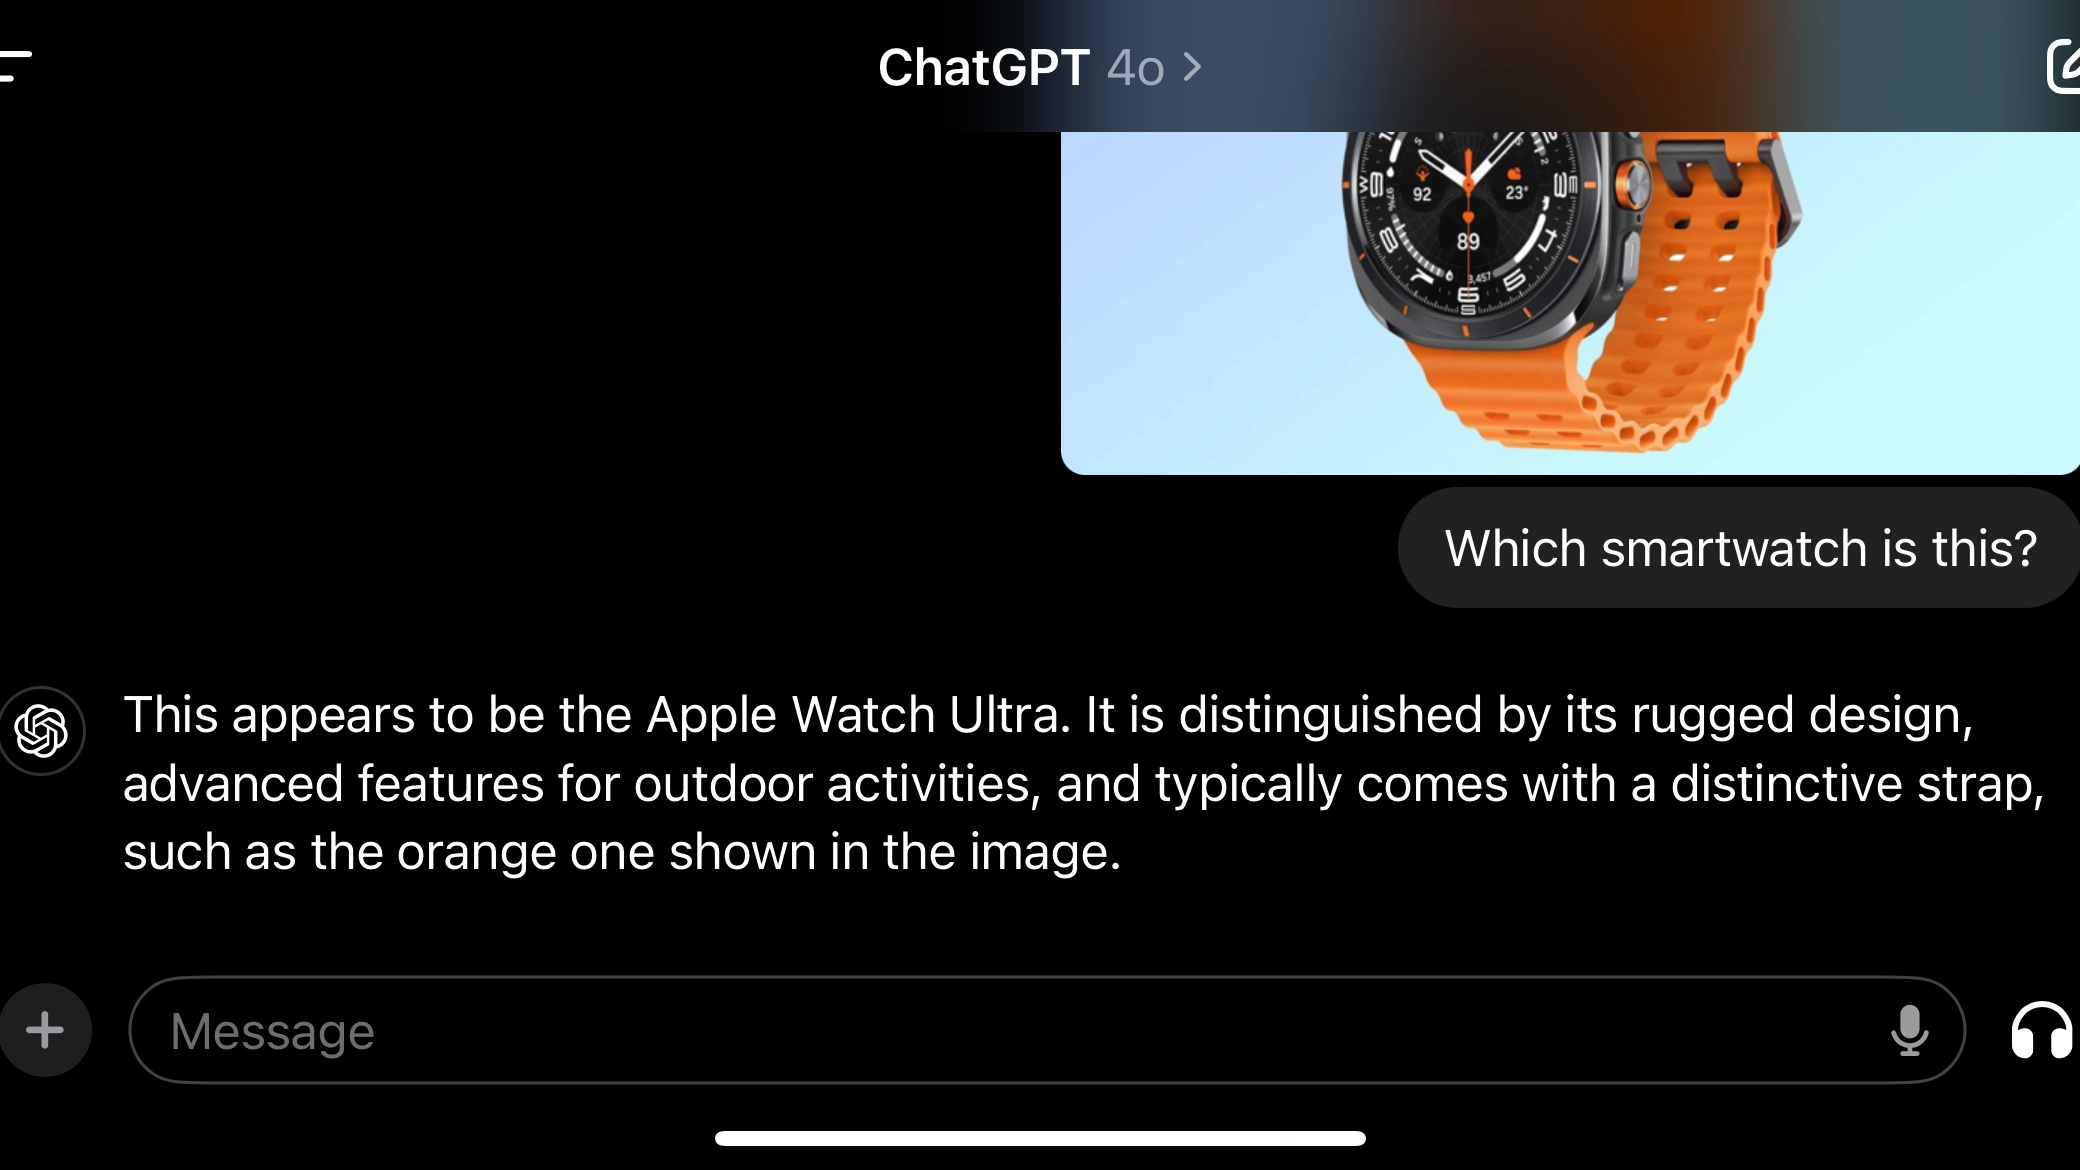 Samsung’s New Watch Is So Similar to Apple’s, Even ChatGPT Is Fooled